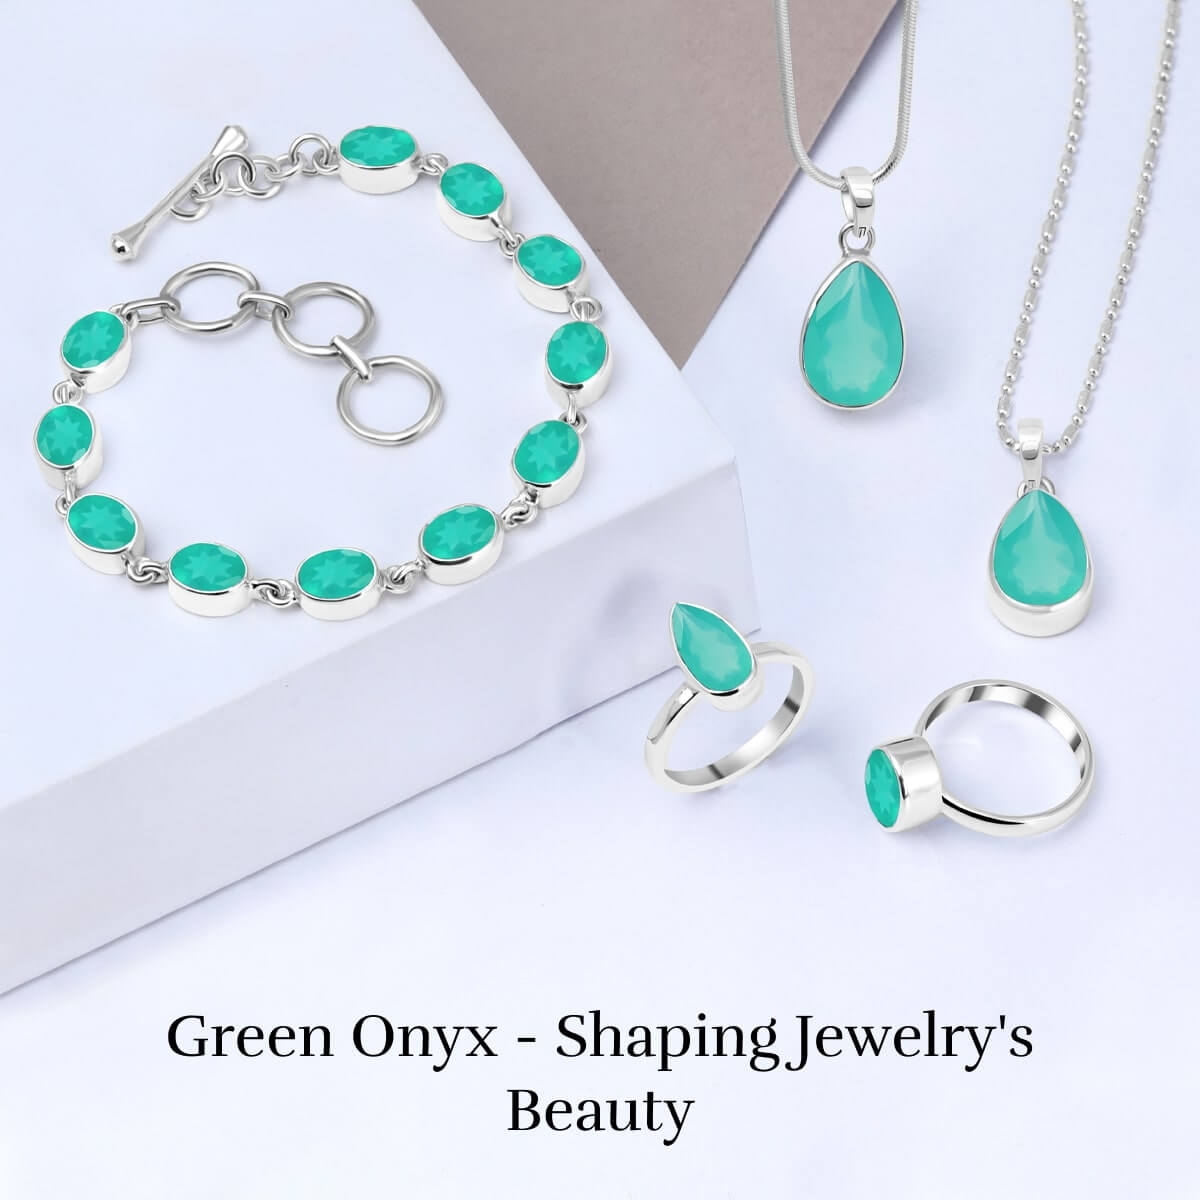 Uses and Importance of Green Onyx in Jewelry Making